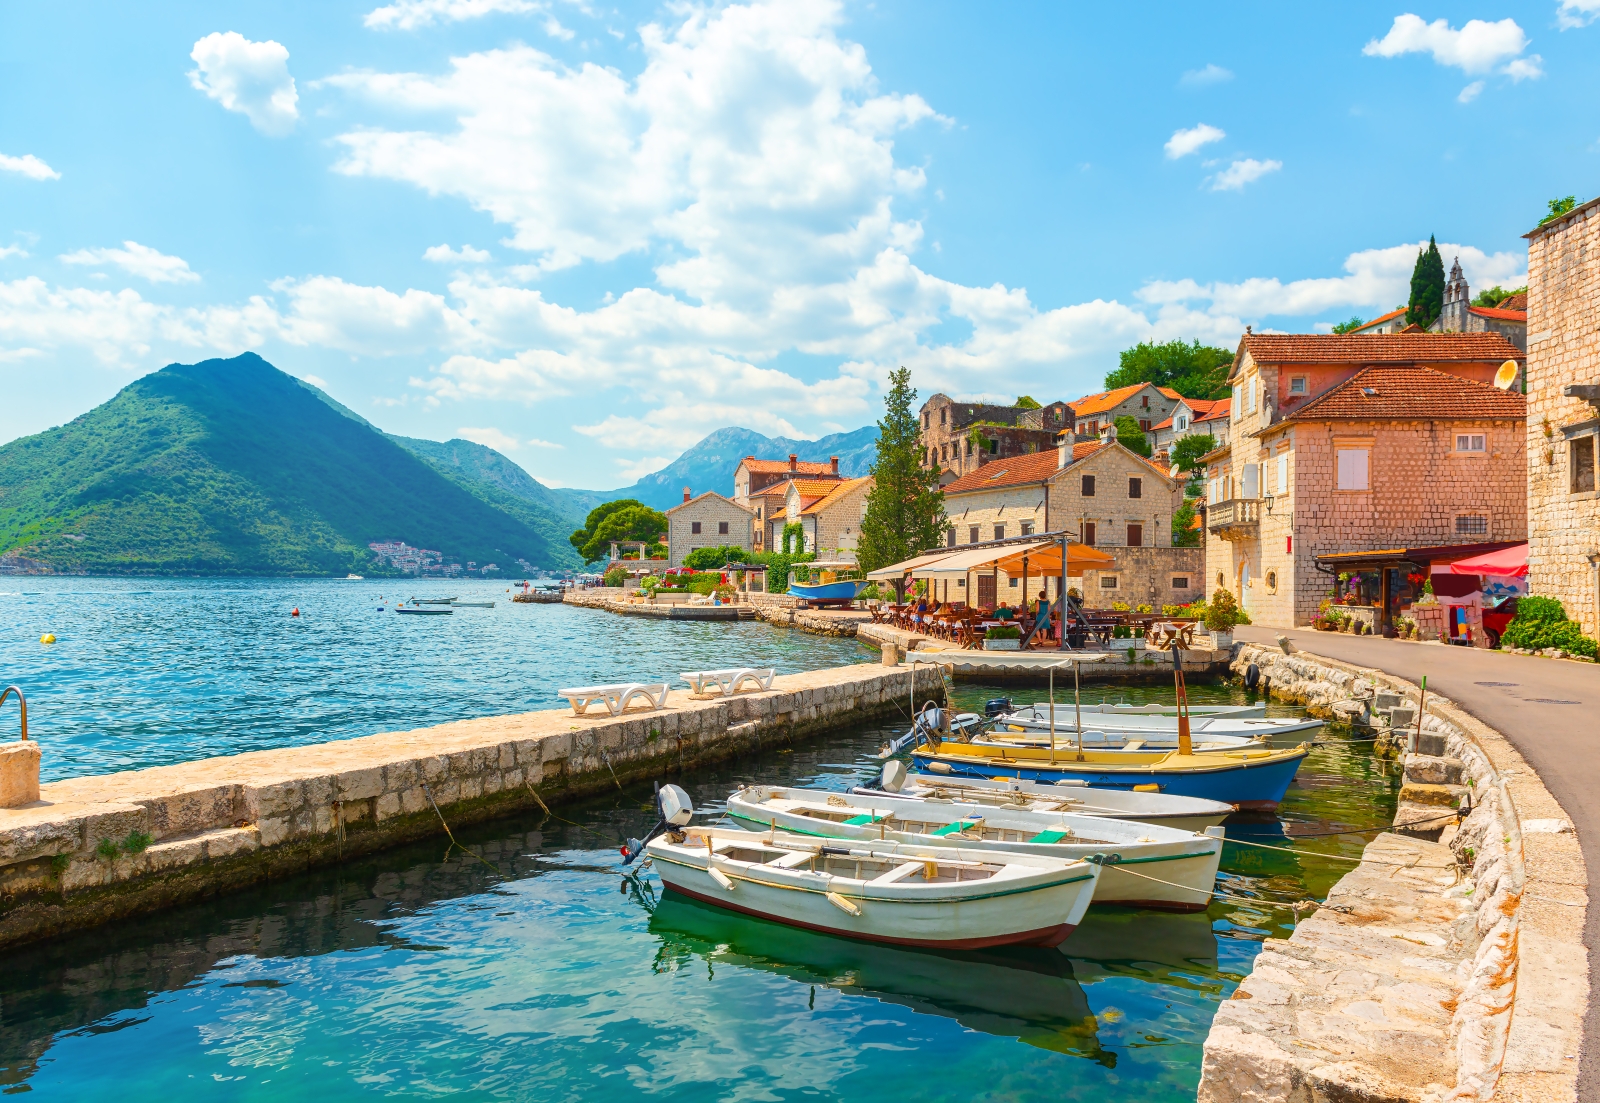 View of Perast Bay with mountains, houses and fishing boats